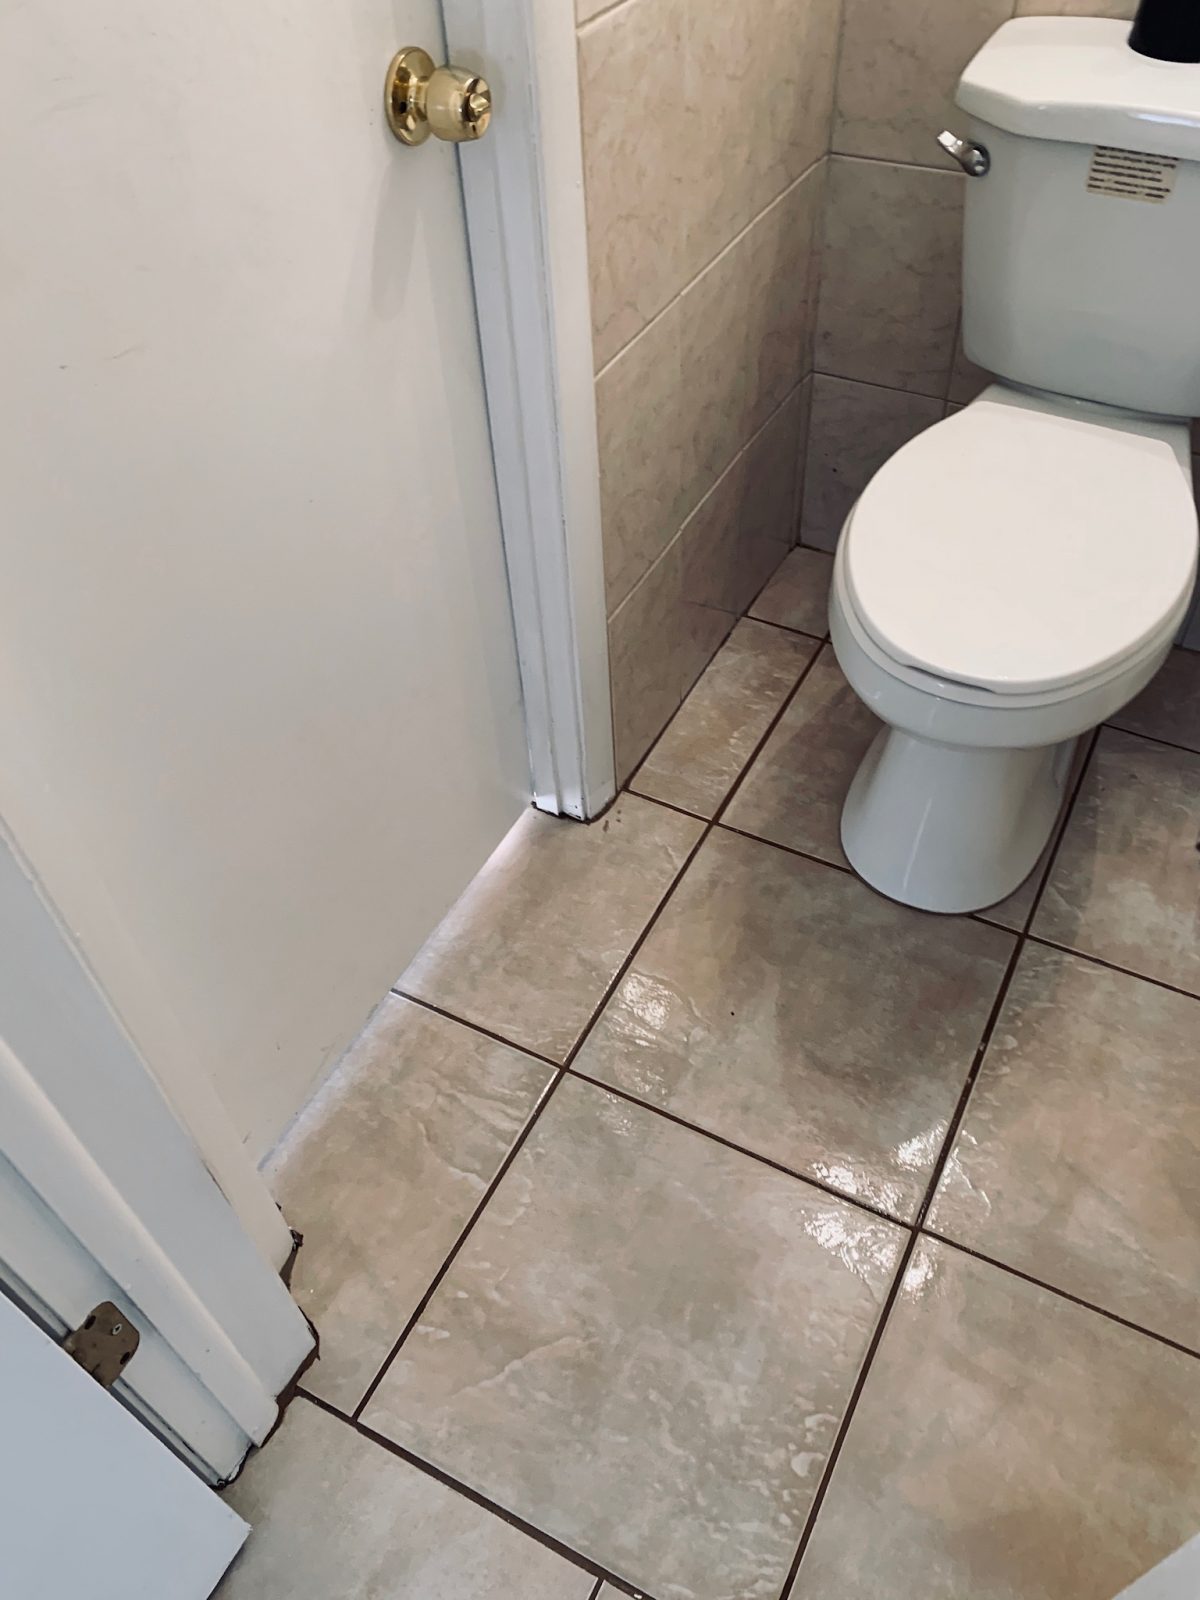 Professional Tile and Grout Cleaning Image New Port Richey Sample 8